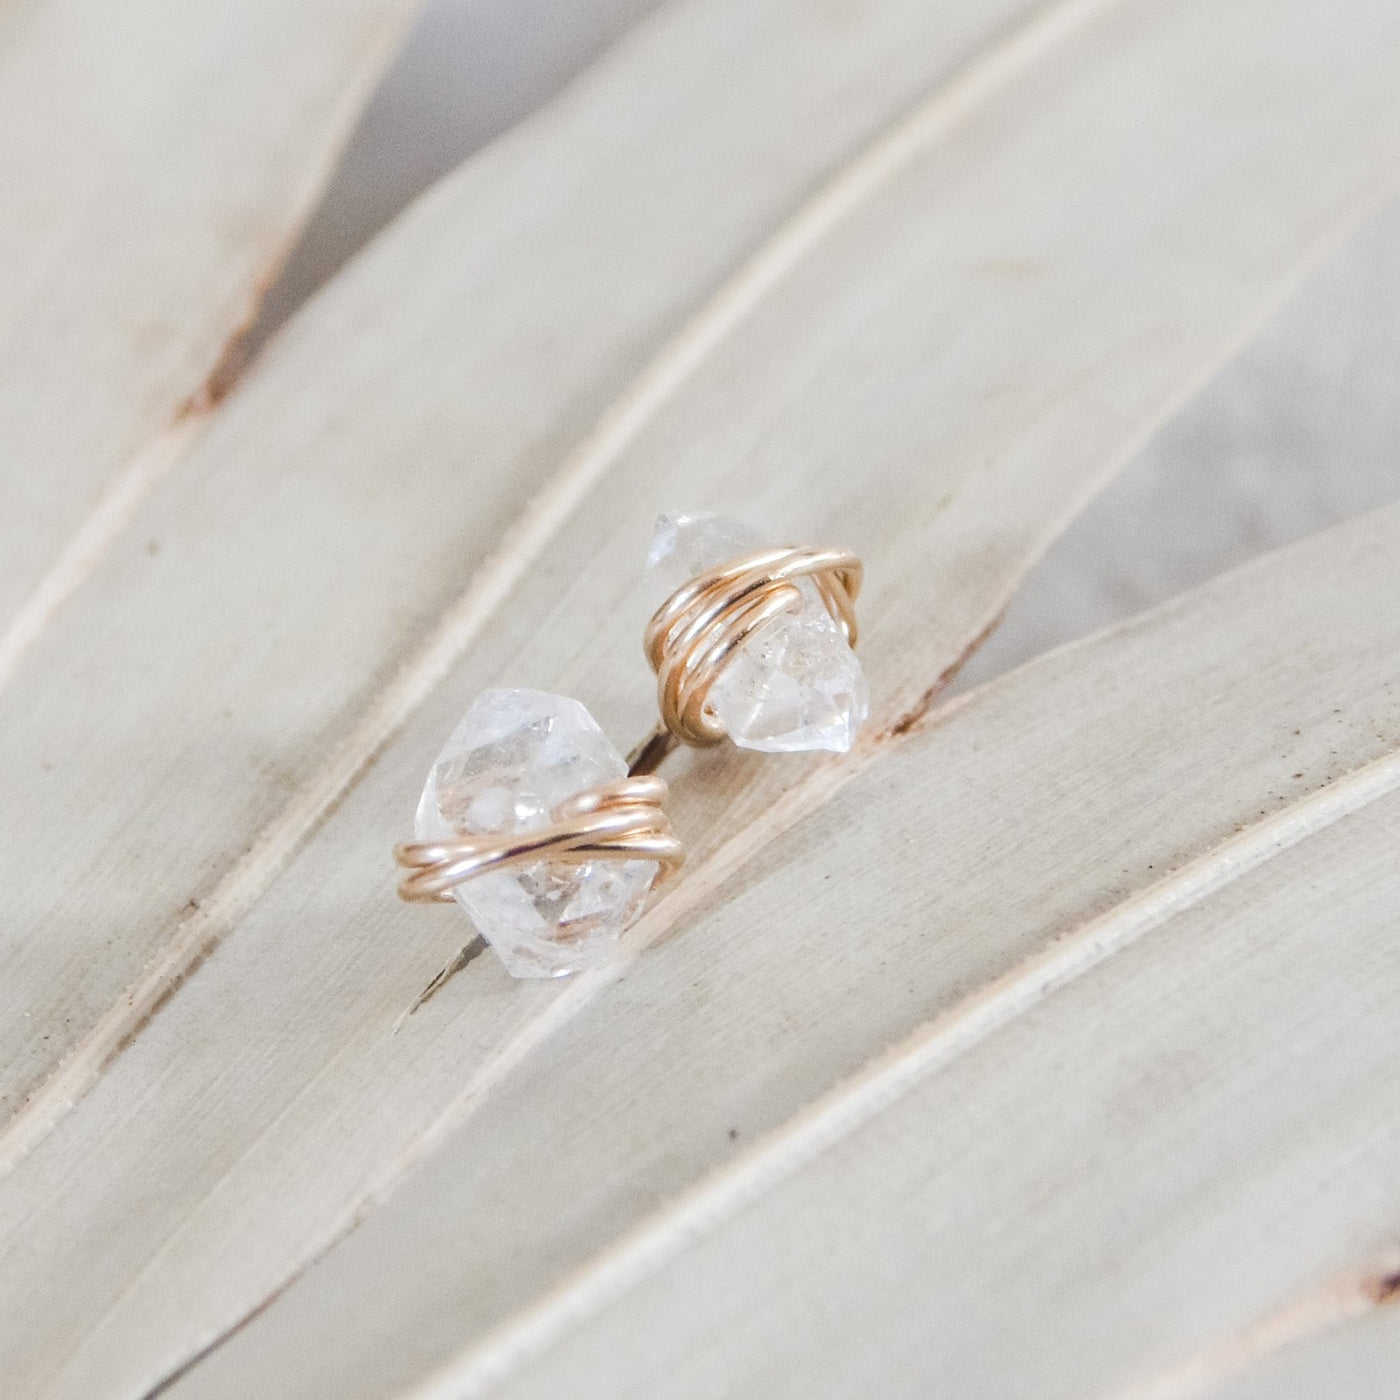 Hand-wired, hypoallergenic Herkimer Diamond Stud Earrings in .925 Sterling Silver, 14k Gold Fill or 14k Rose Gold Fill by Barberry & Lace